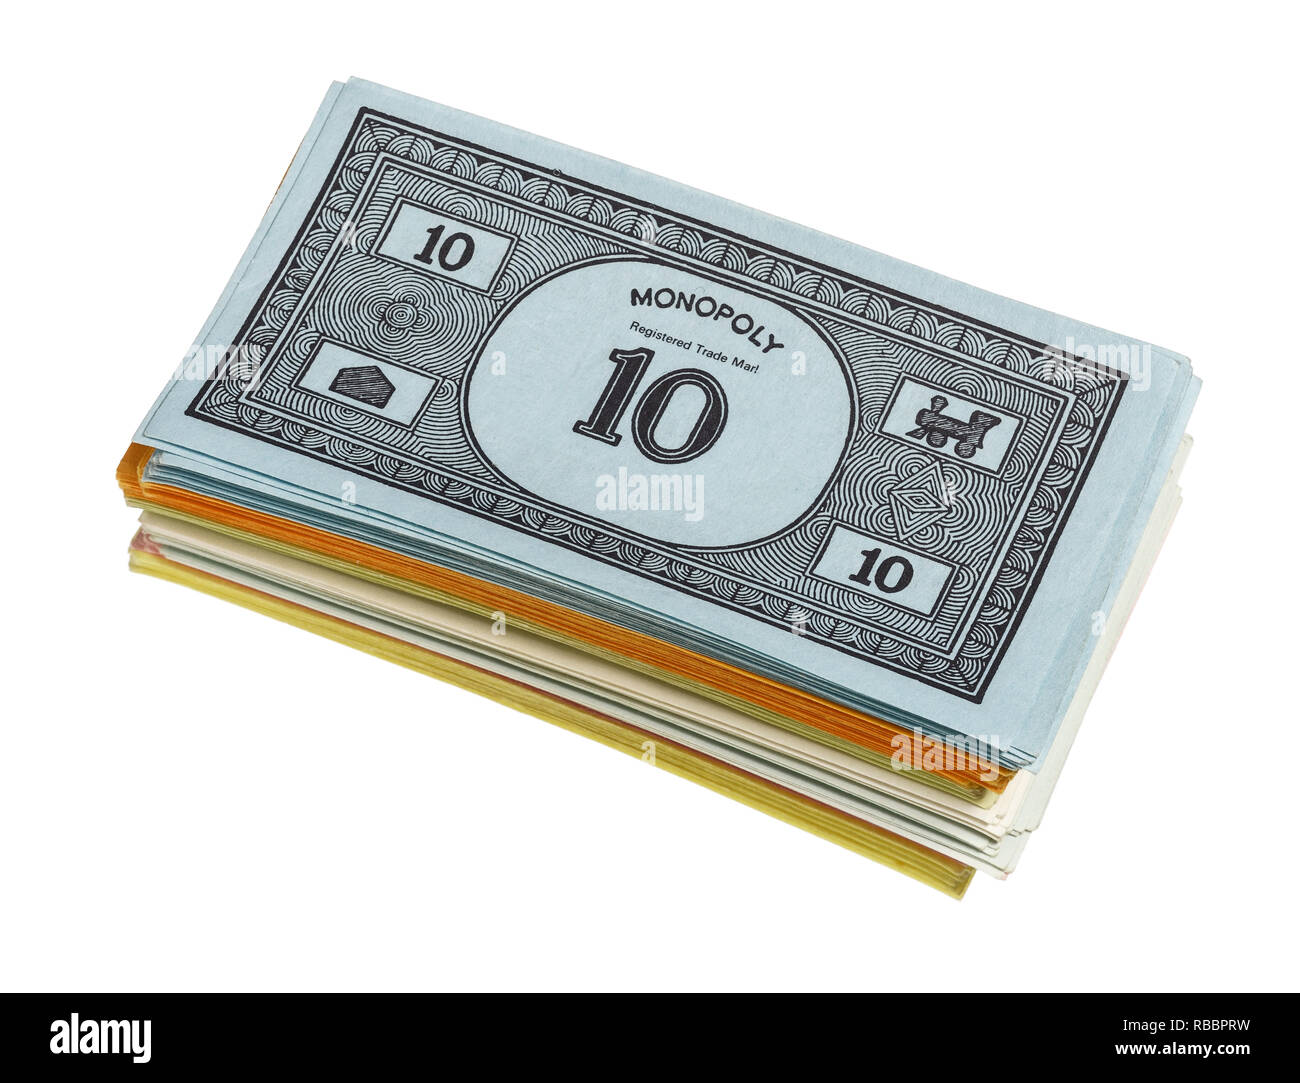 Monopoly Cut Out Stock Images -